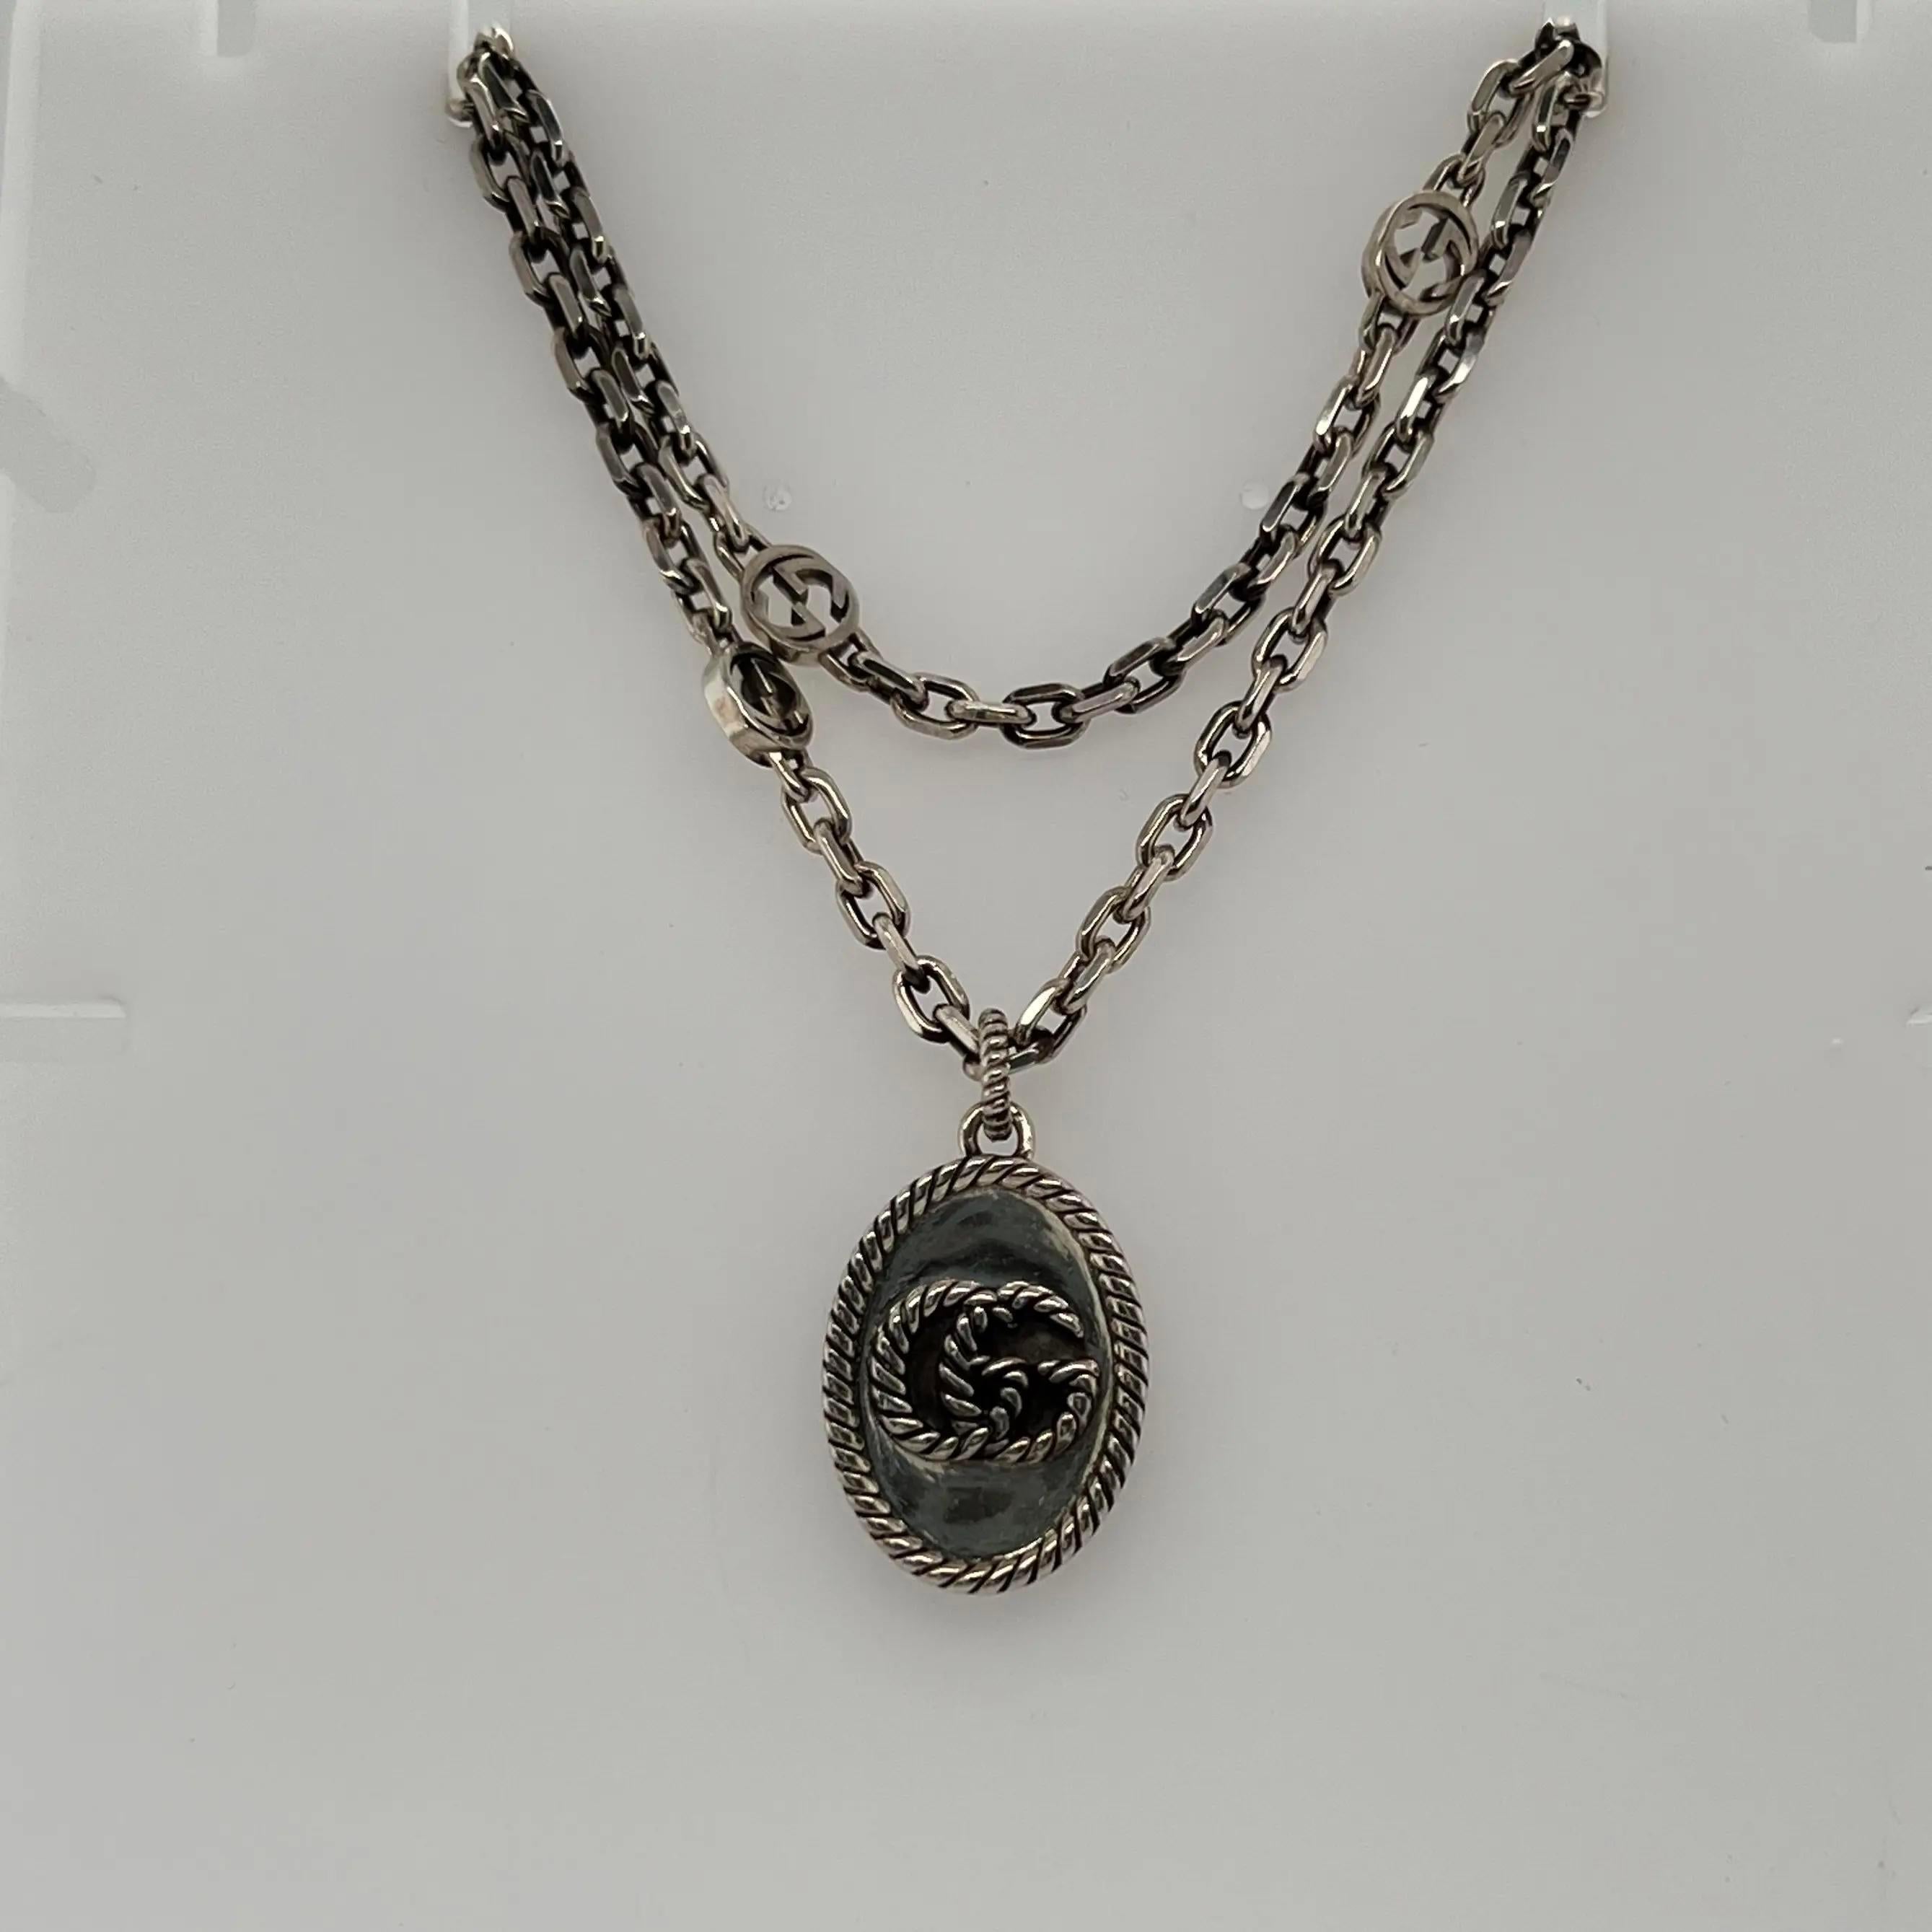 This gorgeous GUCCI pendant necklace is designed in 925 sterling silver with an aged finish. It features interlocking G motif detail on the chain with an oval-shaped Double G pendant. Secured with lobster closure. Chain length: 27 inches. Pendant